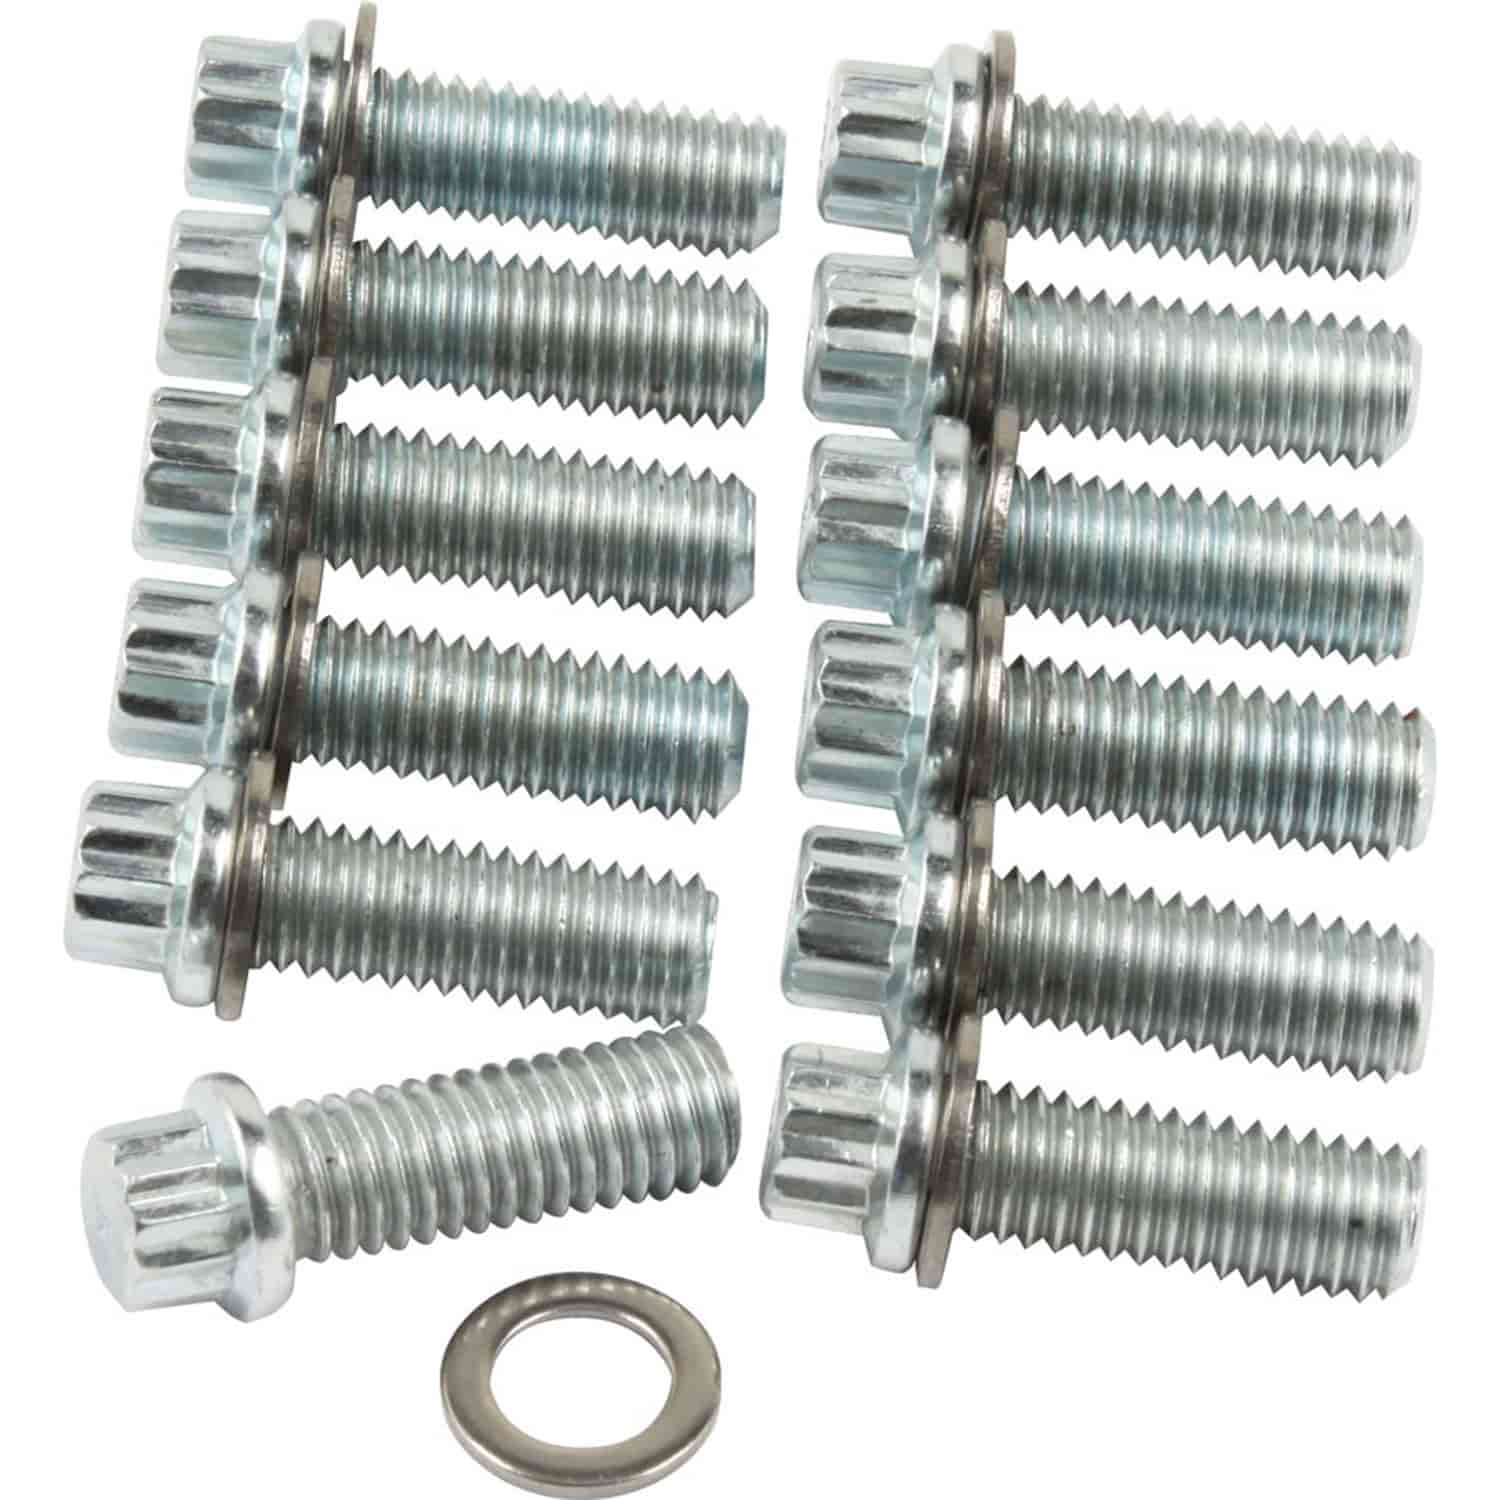 Intake Bolt Kit Small Block Chevy, 12-Point